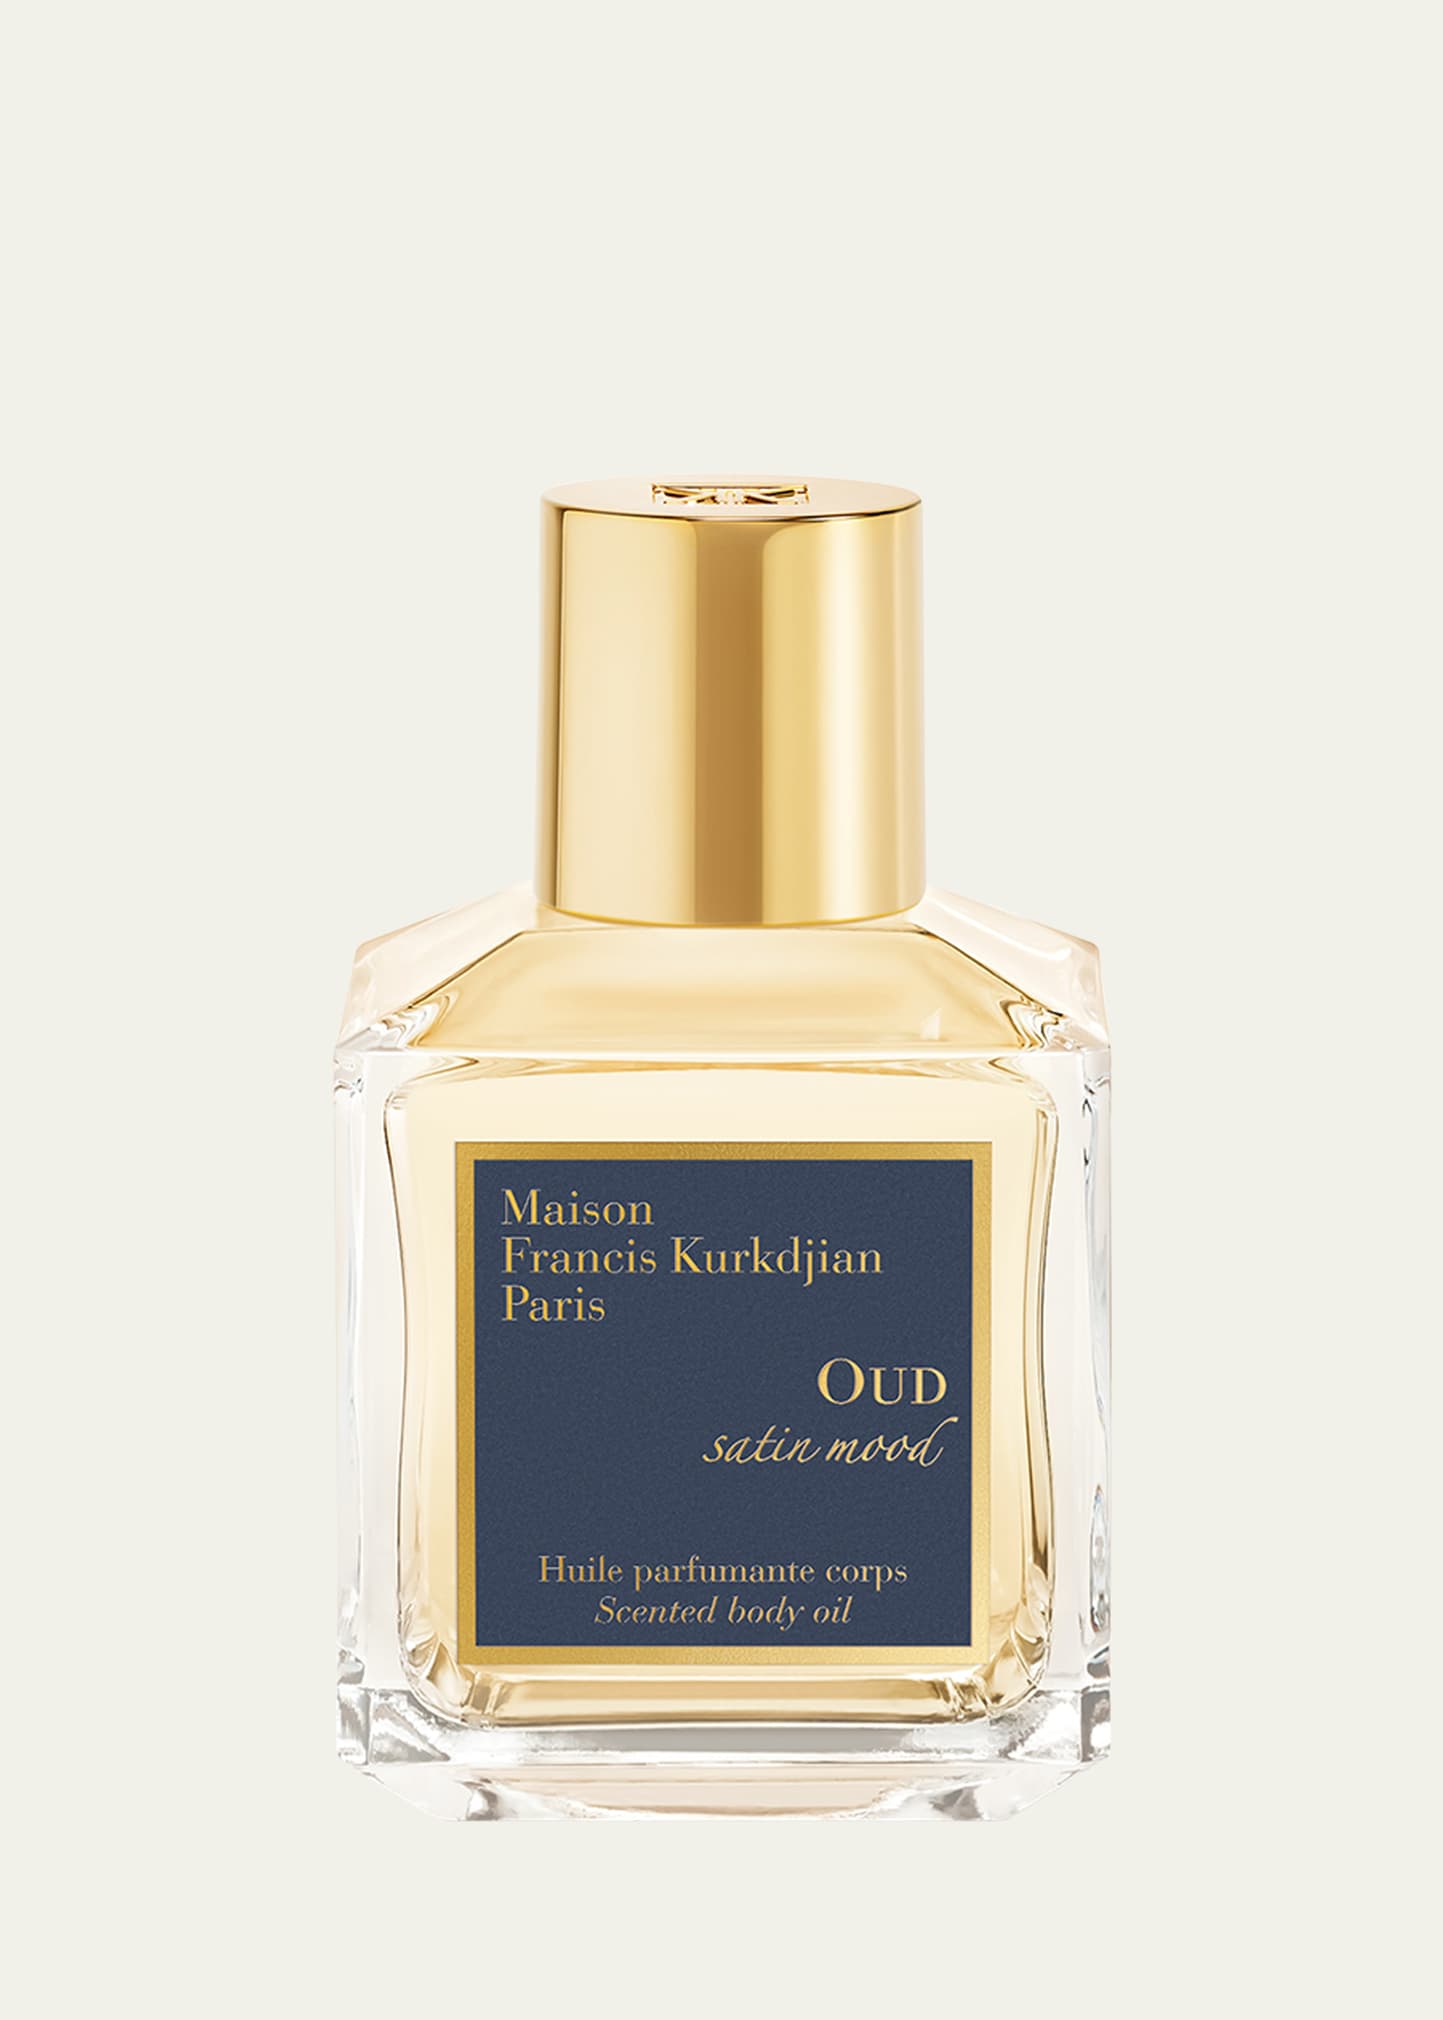 Oud Satin Mood Scented Body Oil, 2.4 oz.